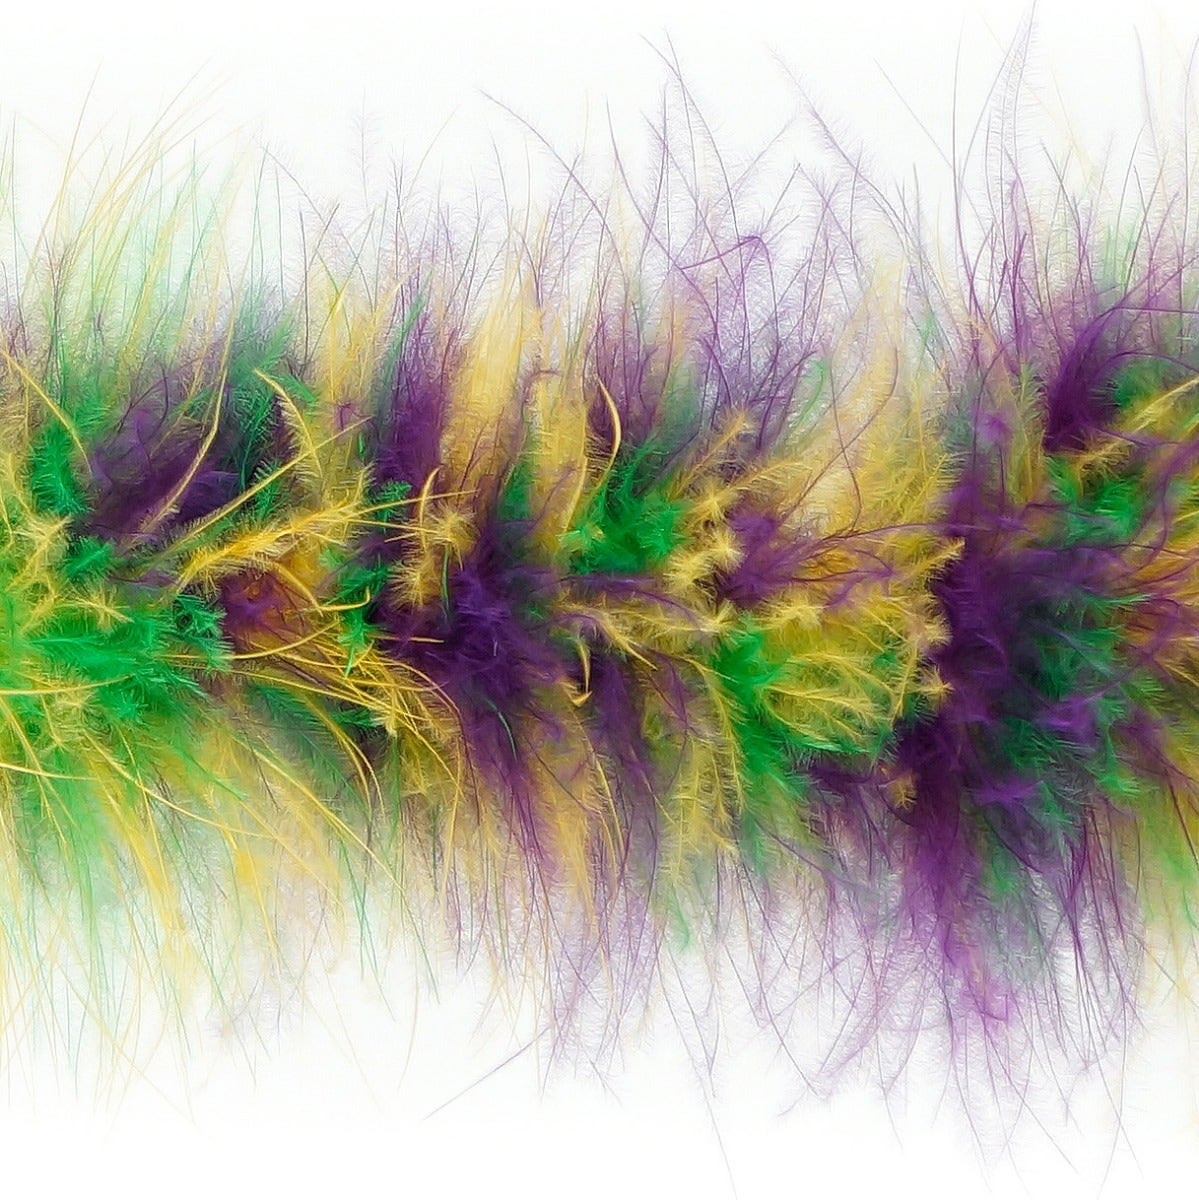 Zucker Feather Products Marabou Feather Boas Multi Color - Mardigras